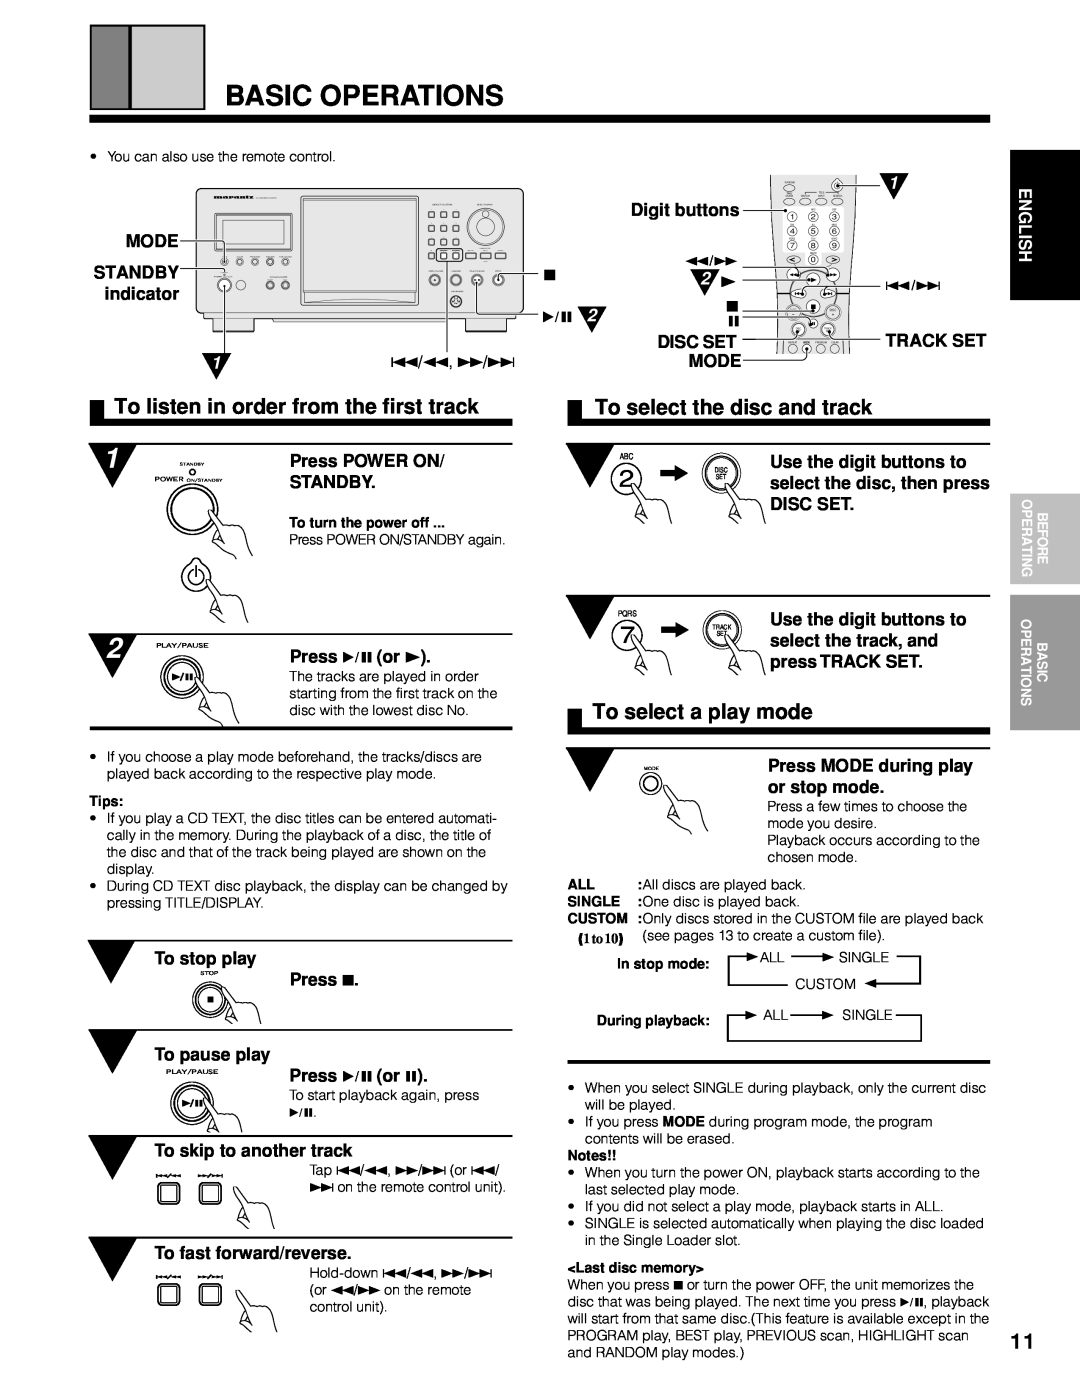 Marantz CC9100 manual Basic Operations, To listen in order from the first track, To select the disc and track, English 